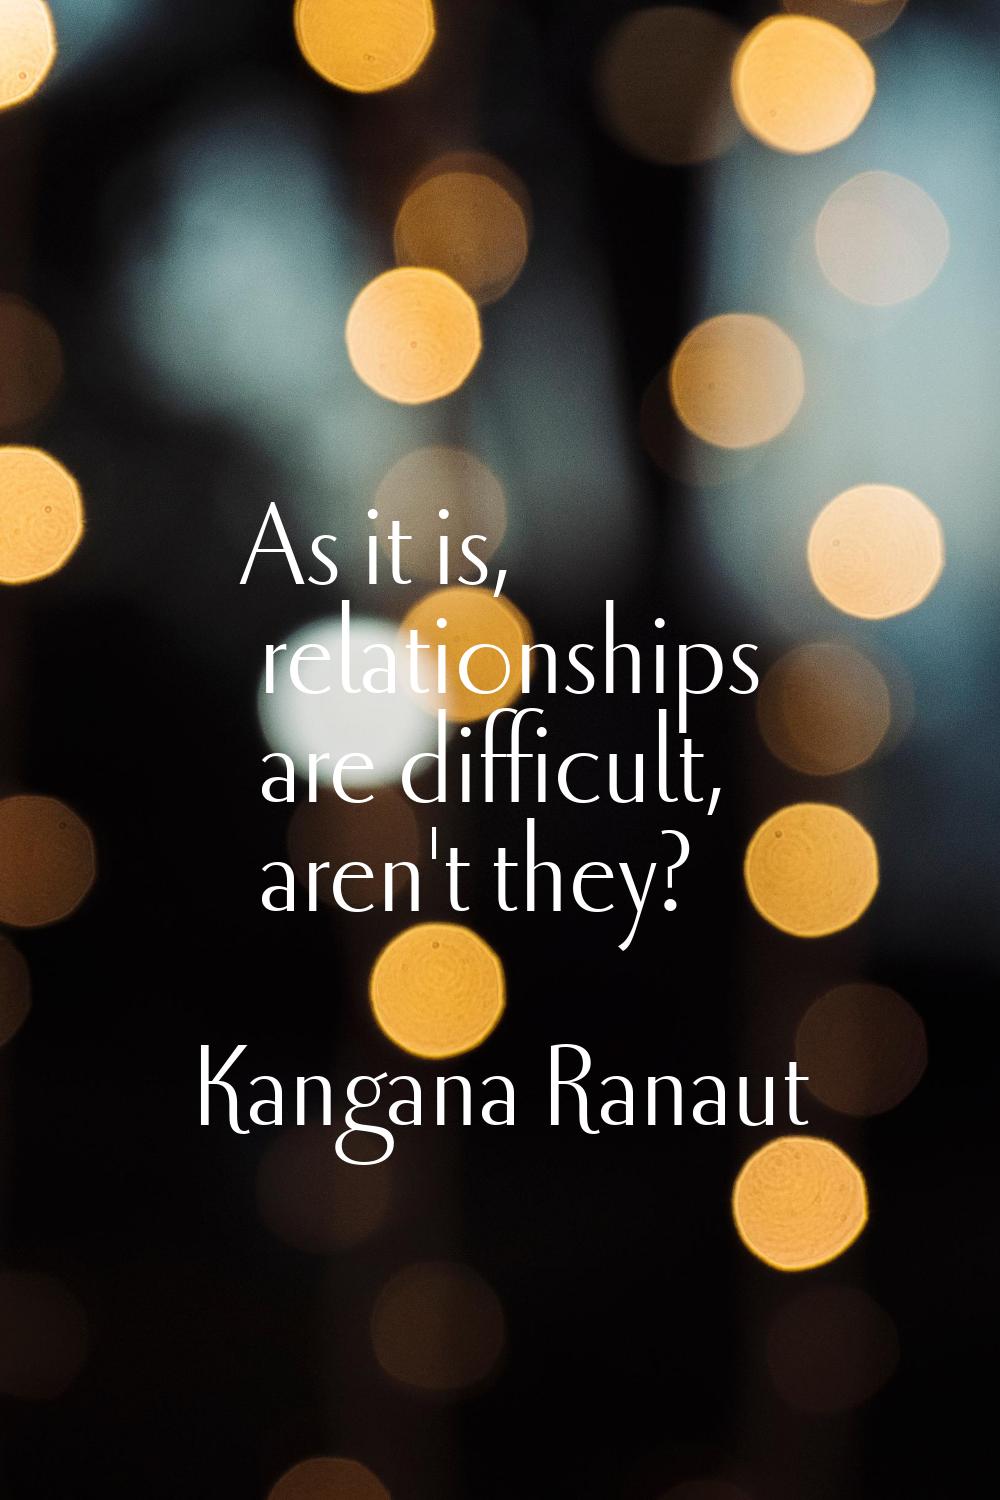 As it is, relationships are difficult, aren't they?